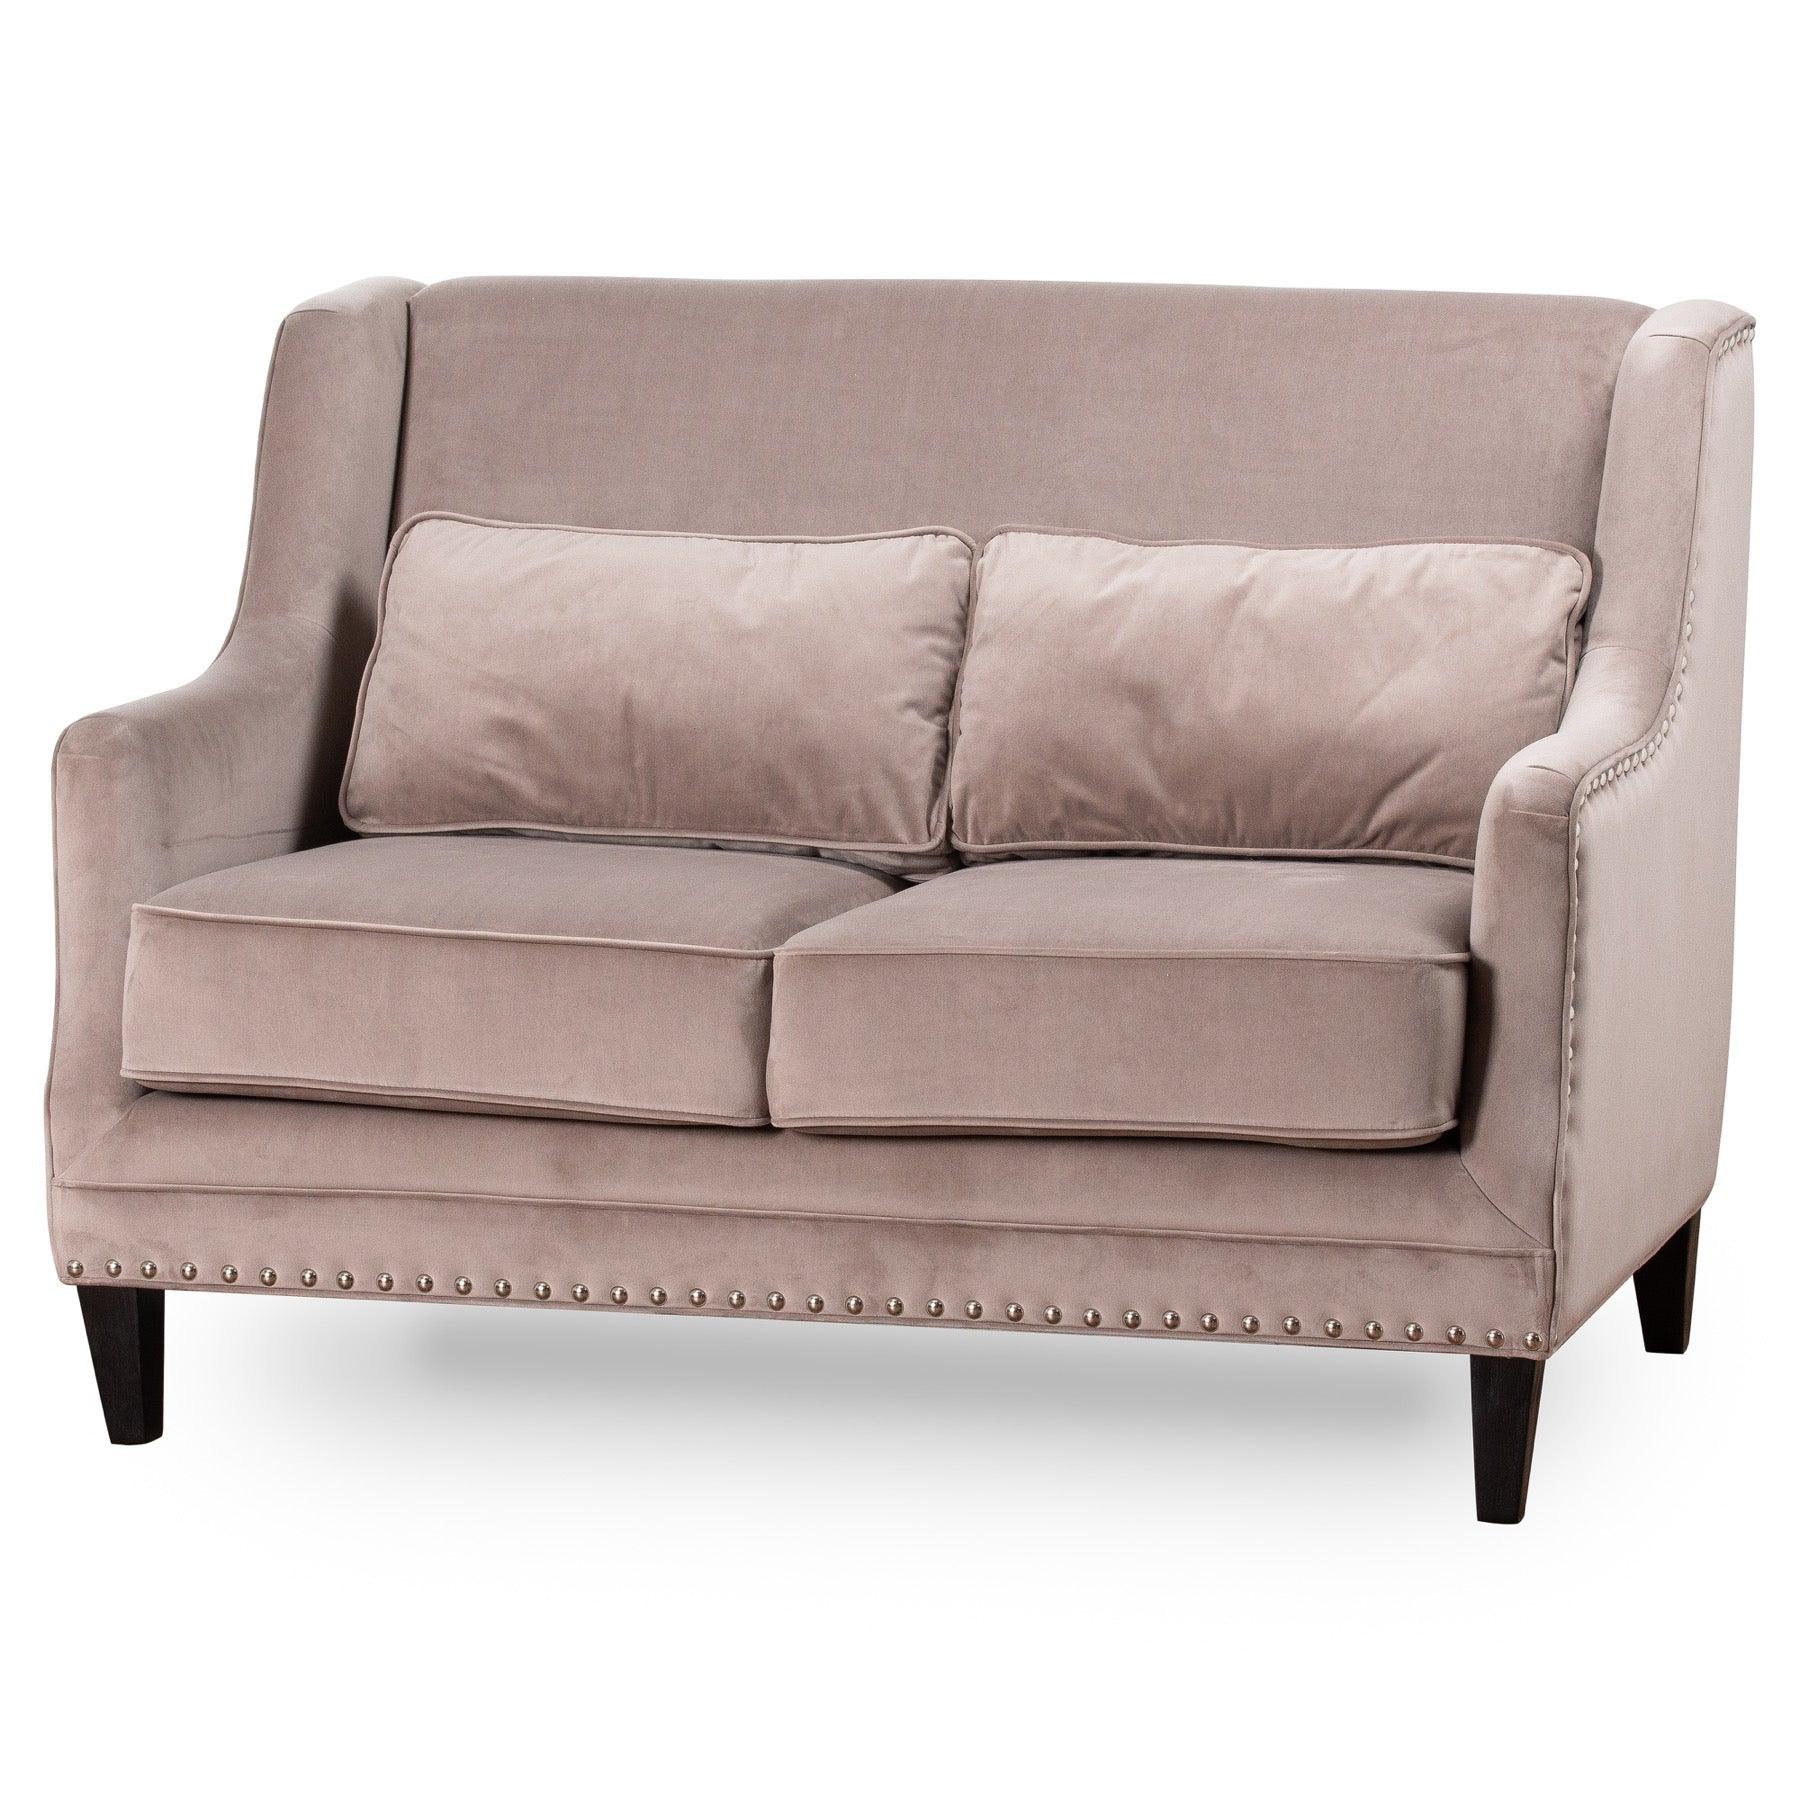 Chelsea Studded Two Seater Sofa - Vookoo Lifestyle